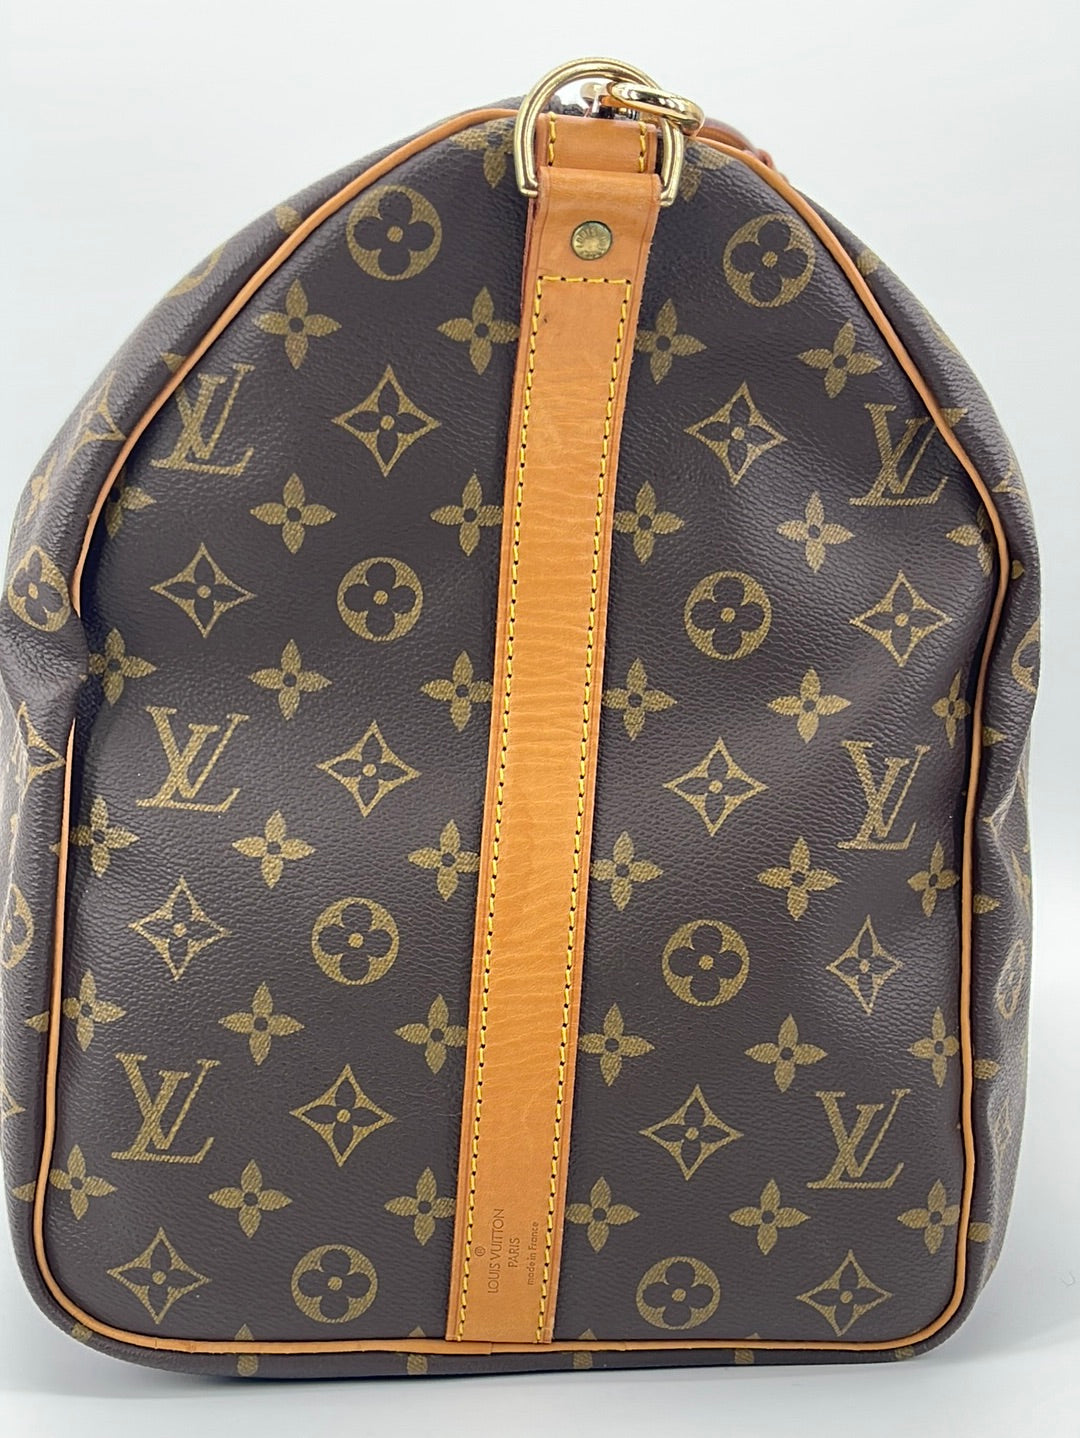 Louis_Stores - NEW IN‼️😍😍 Louis Vuitton Keepall Bandolier 50 Duffle Bag  Available Quality Is Top Notch Comes With Full Box And Packaging😁 Price:  50,000 Naira Size: Available for delivery Worldwide  ••